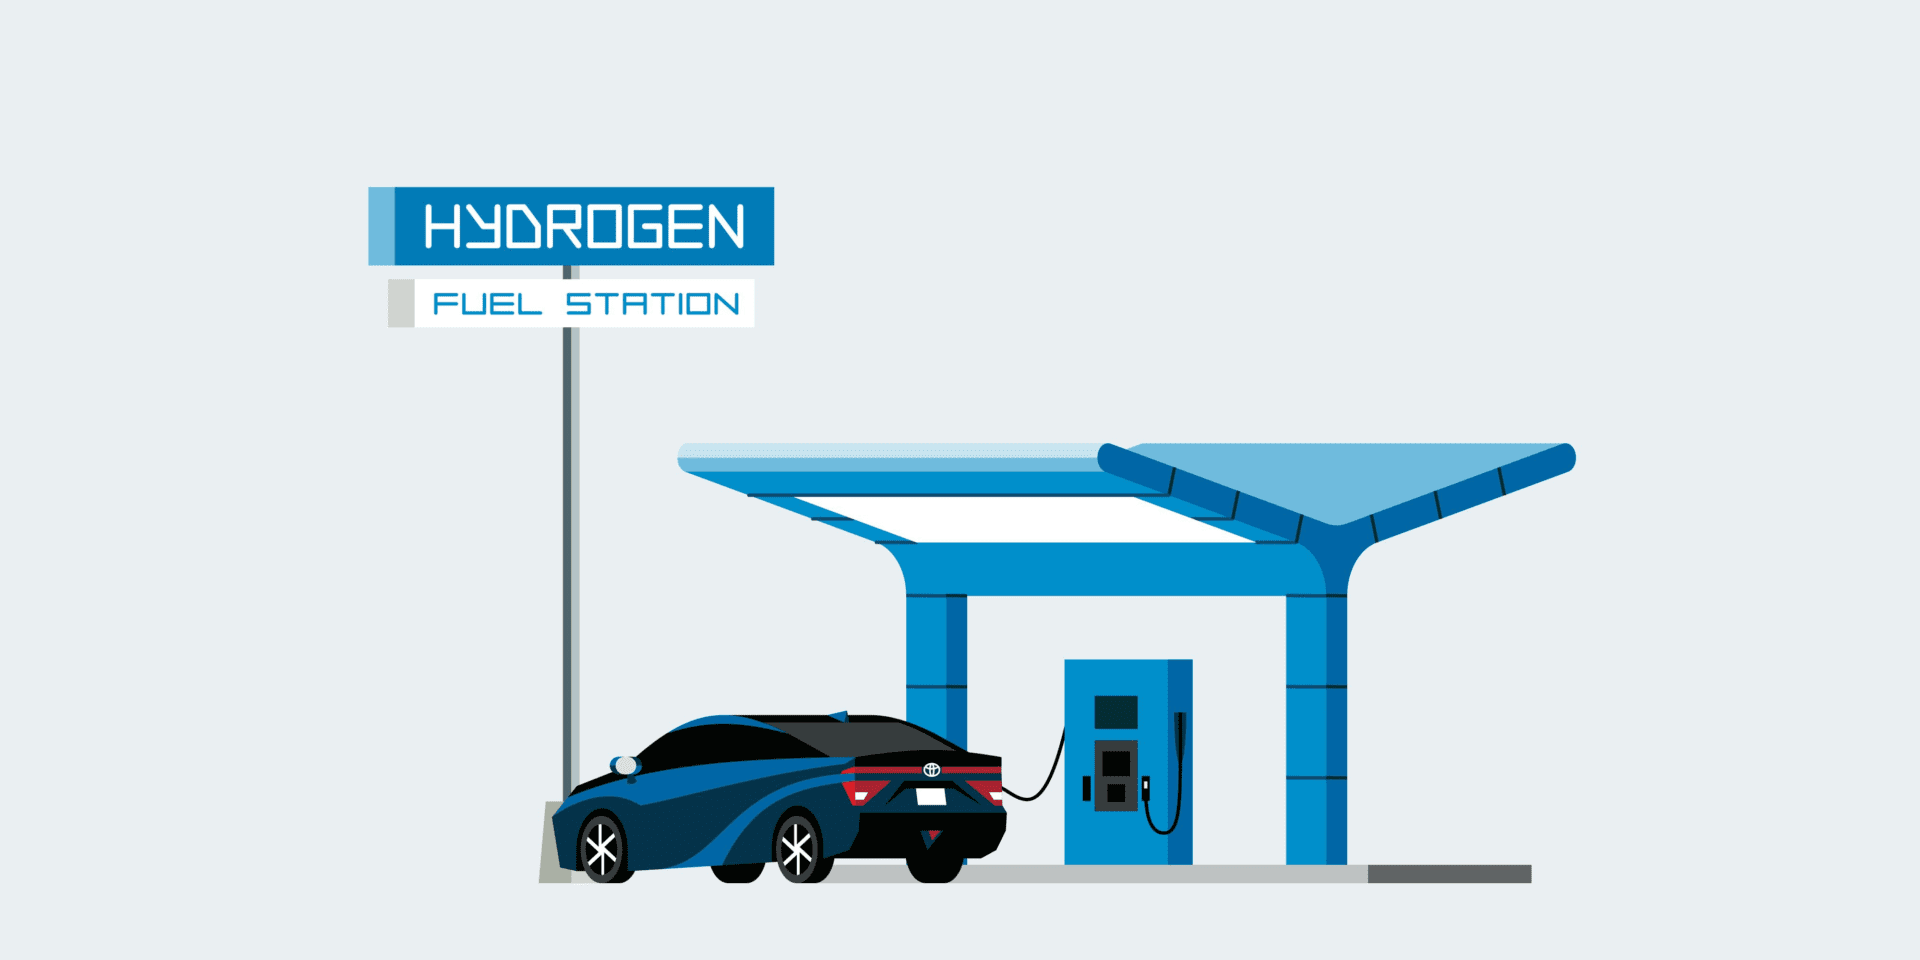 UAE to launch hydrogen-powered car fuel station